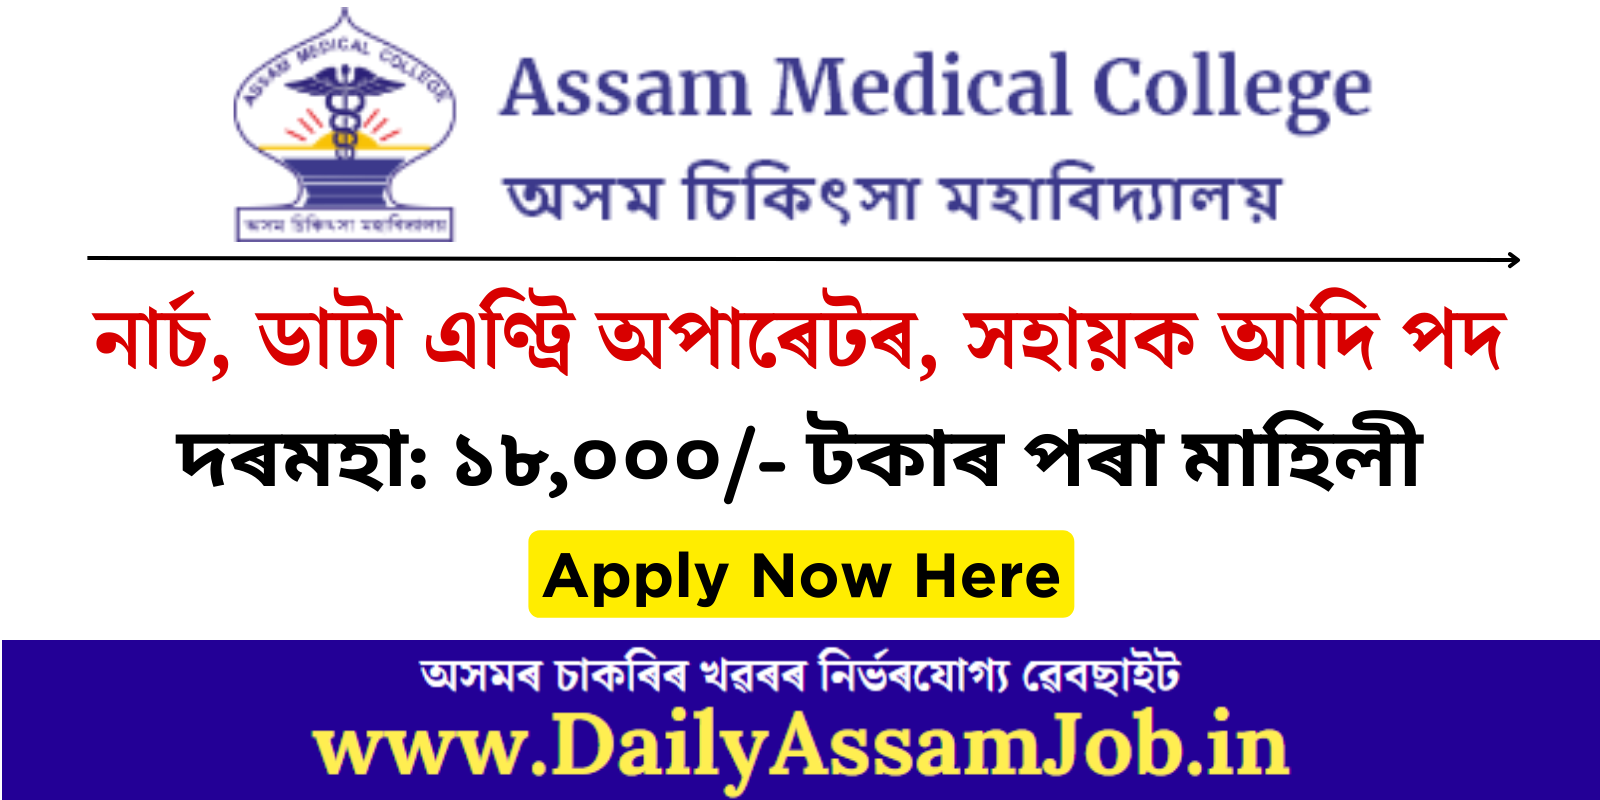 Assam Career :: Assam Medical College Recruitment 2023 for 4 Nurse, Data Entry, Assistant & Other Vacancy